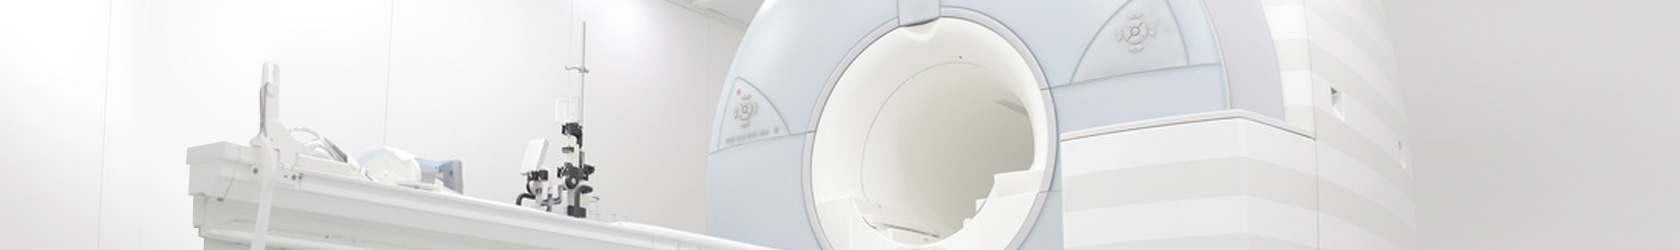 Photo of a medical MRI machine, showing how Blue Photon can be used to hold parts during creation of custom medical components